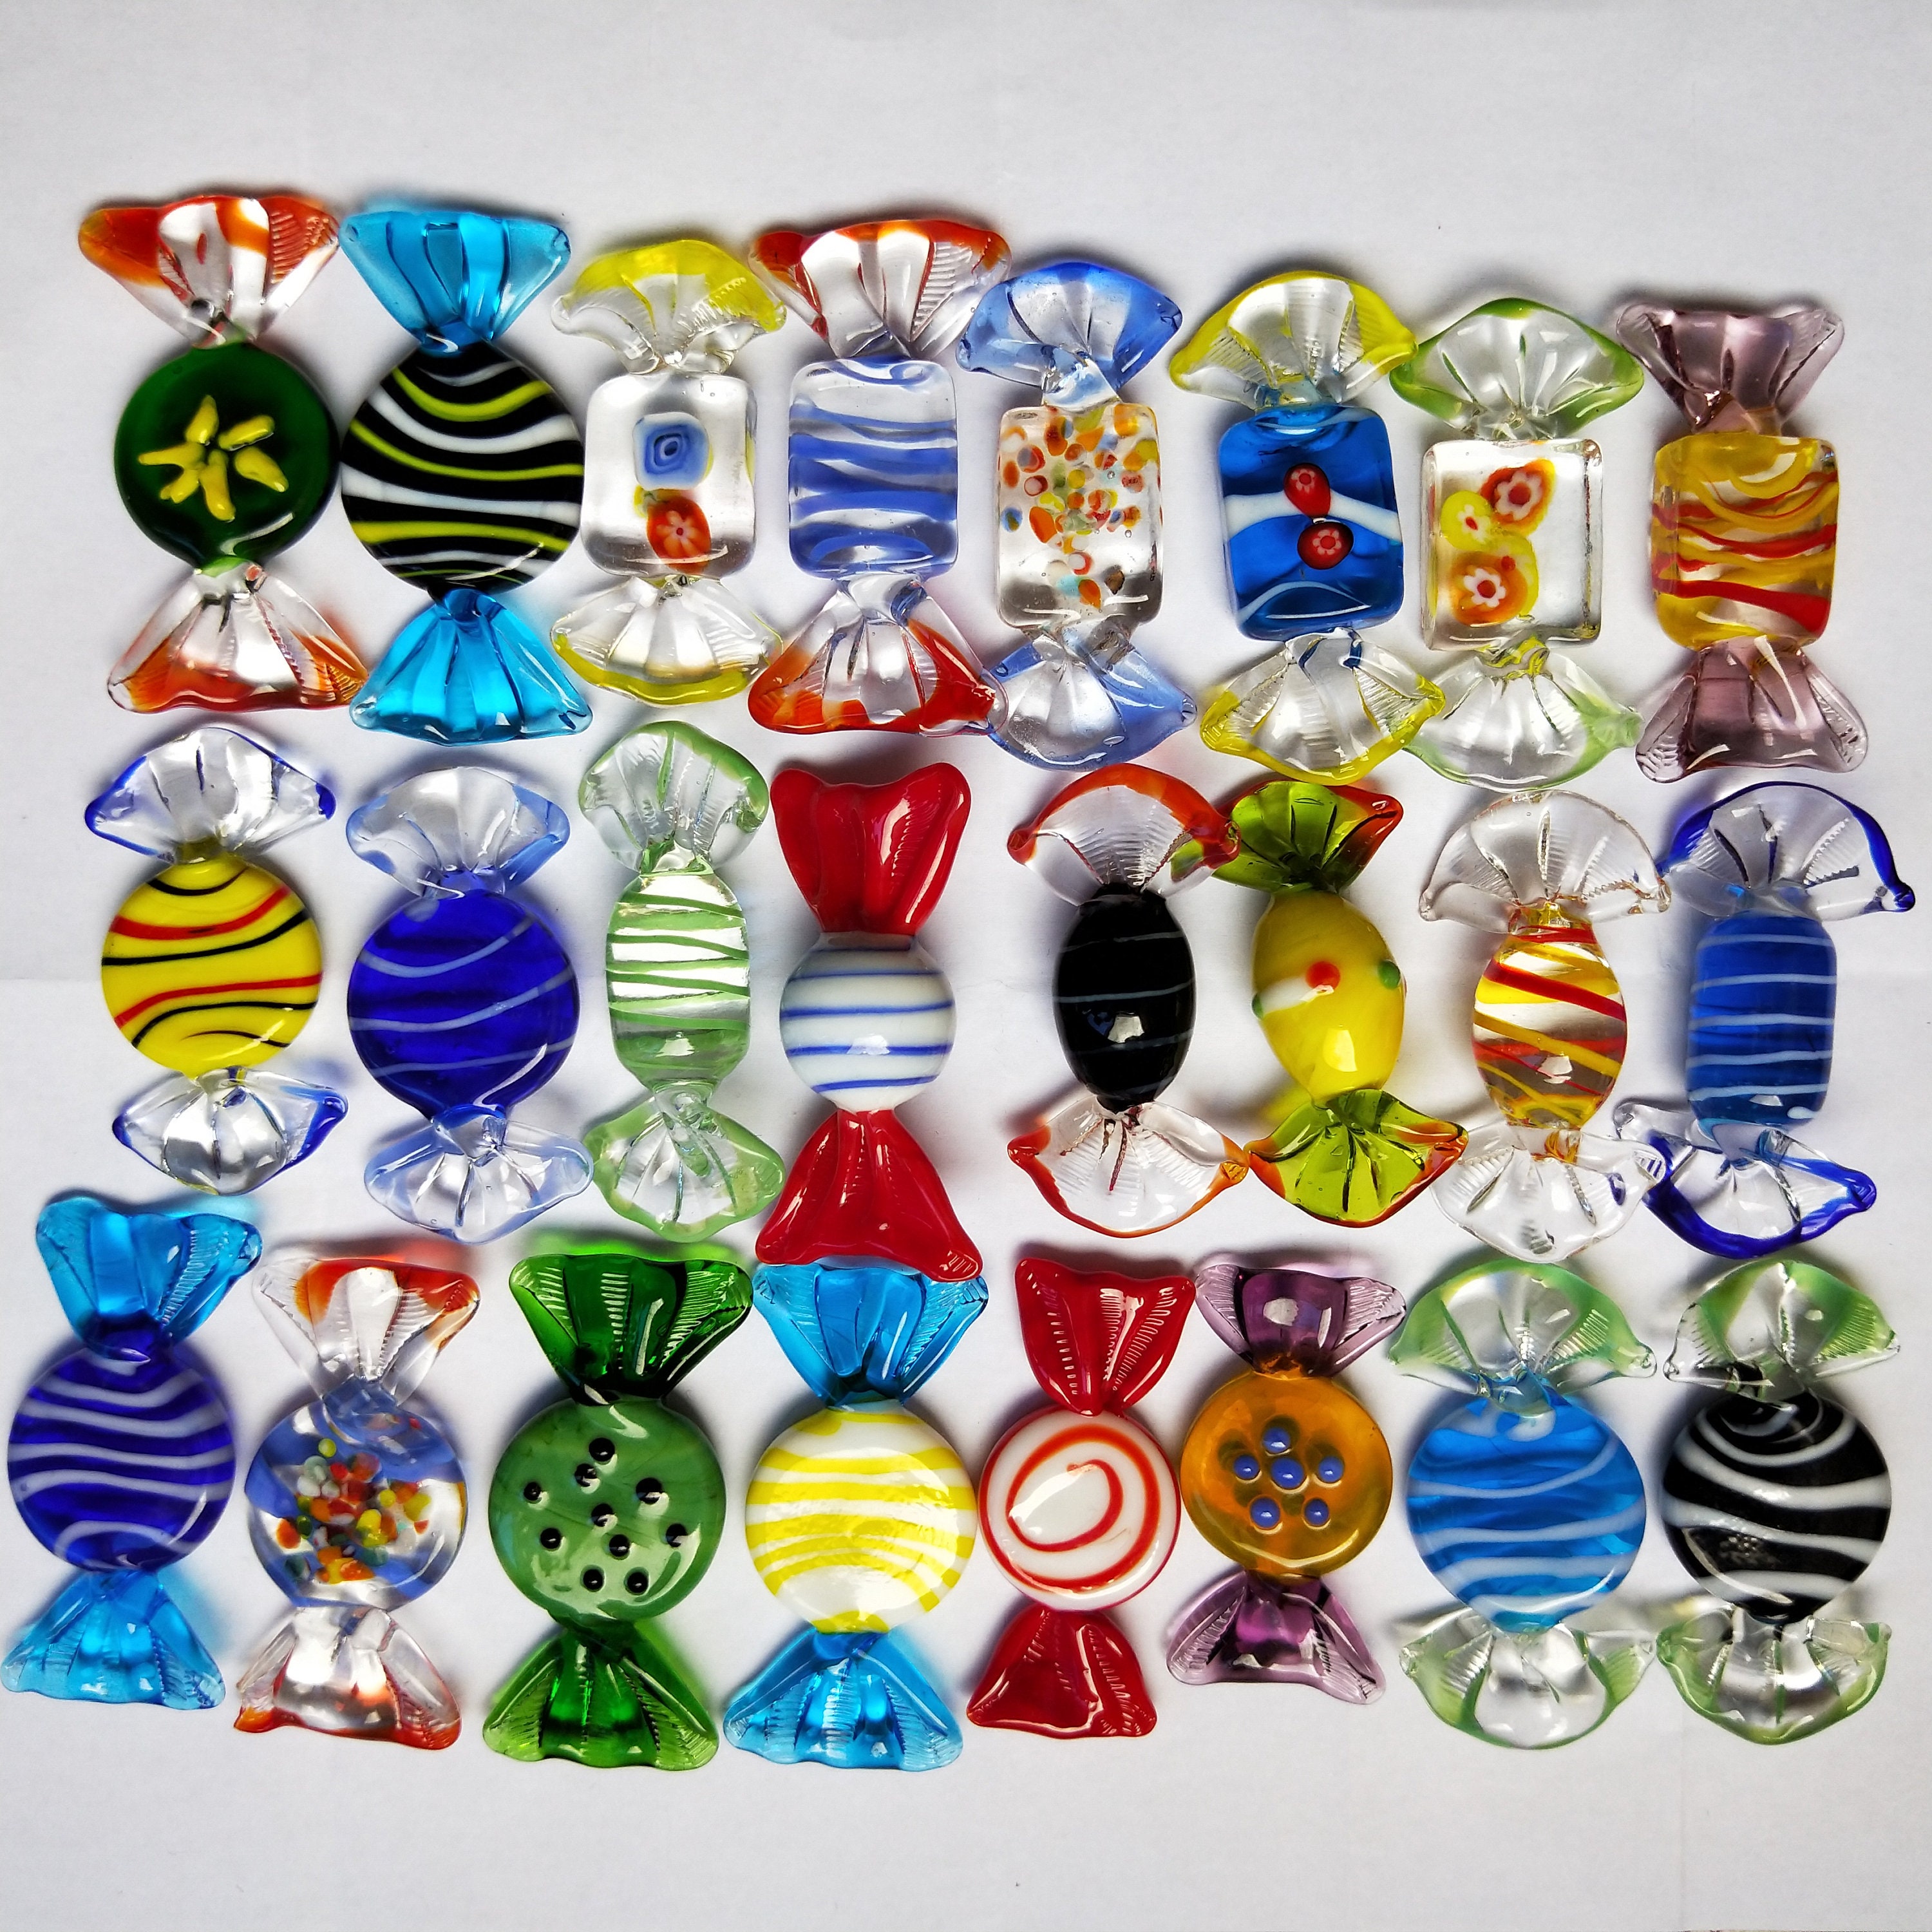  Brccee AC 20pcs Glass Candy Vintage Murano Glass Sweets Wedding  Birthday Halloween Christmas Party Candy Decorations Gift : Home & Kitchen